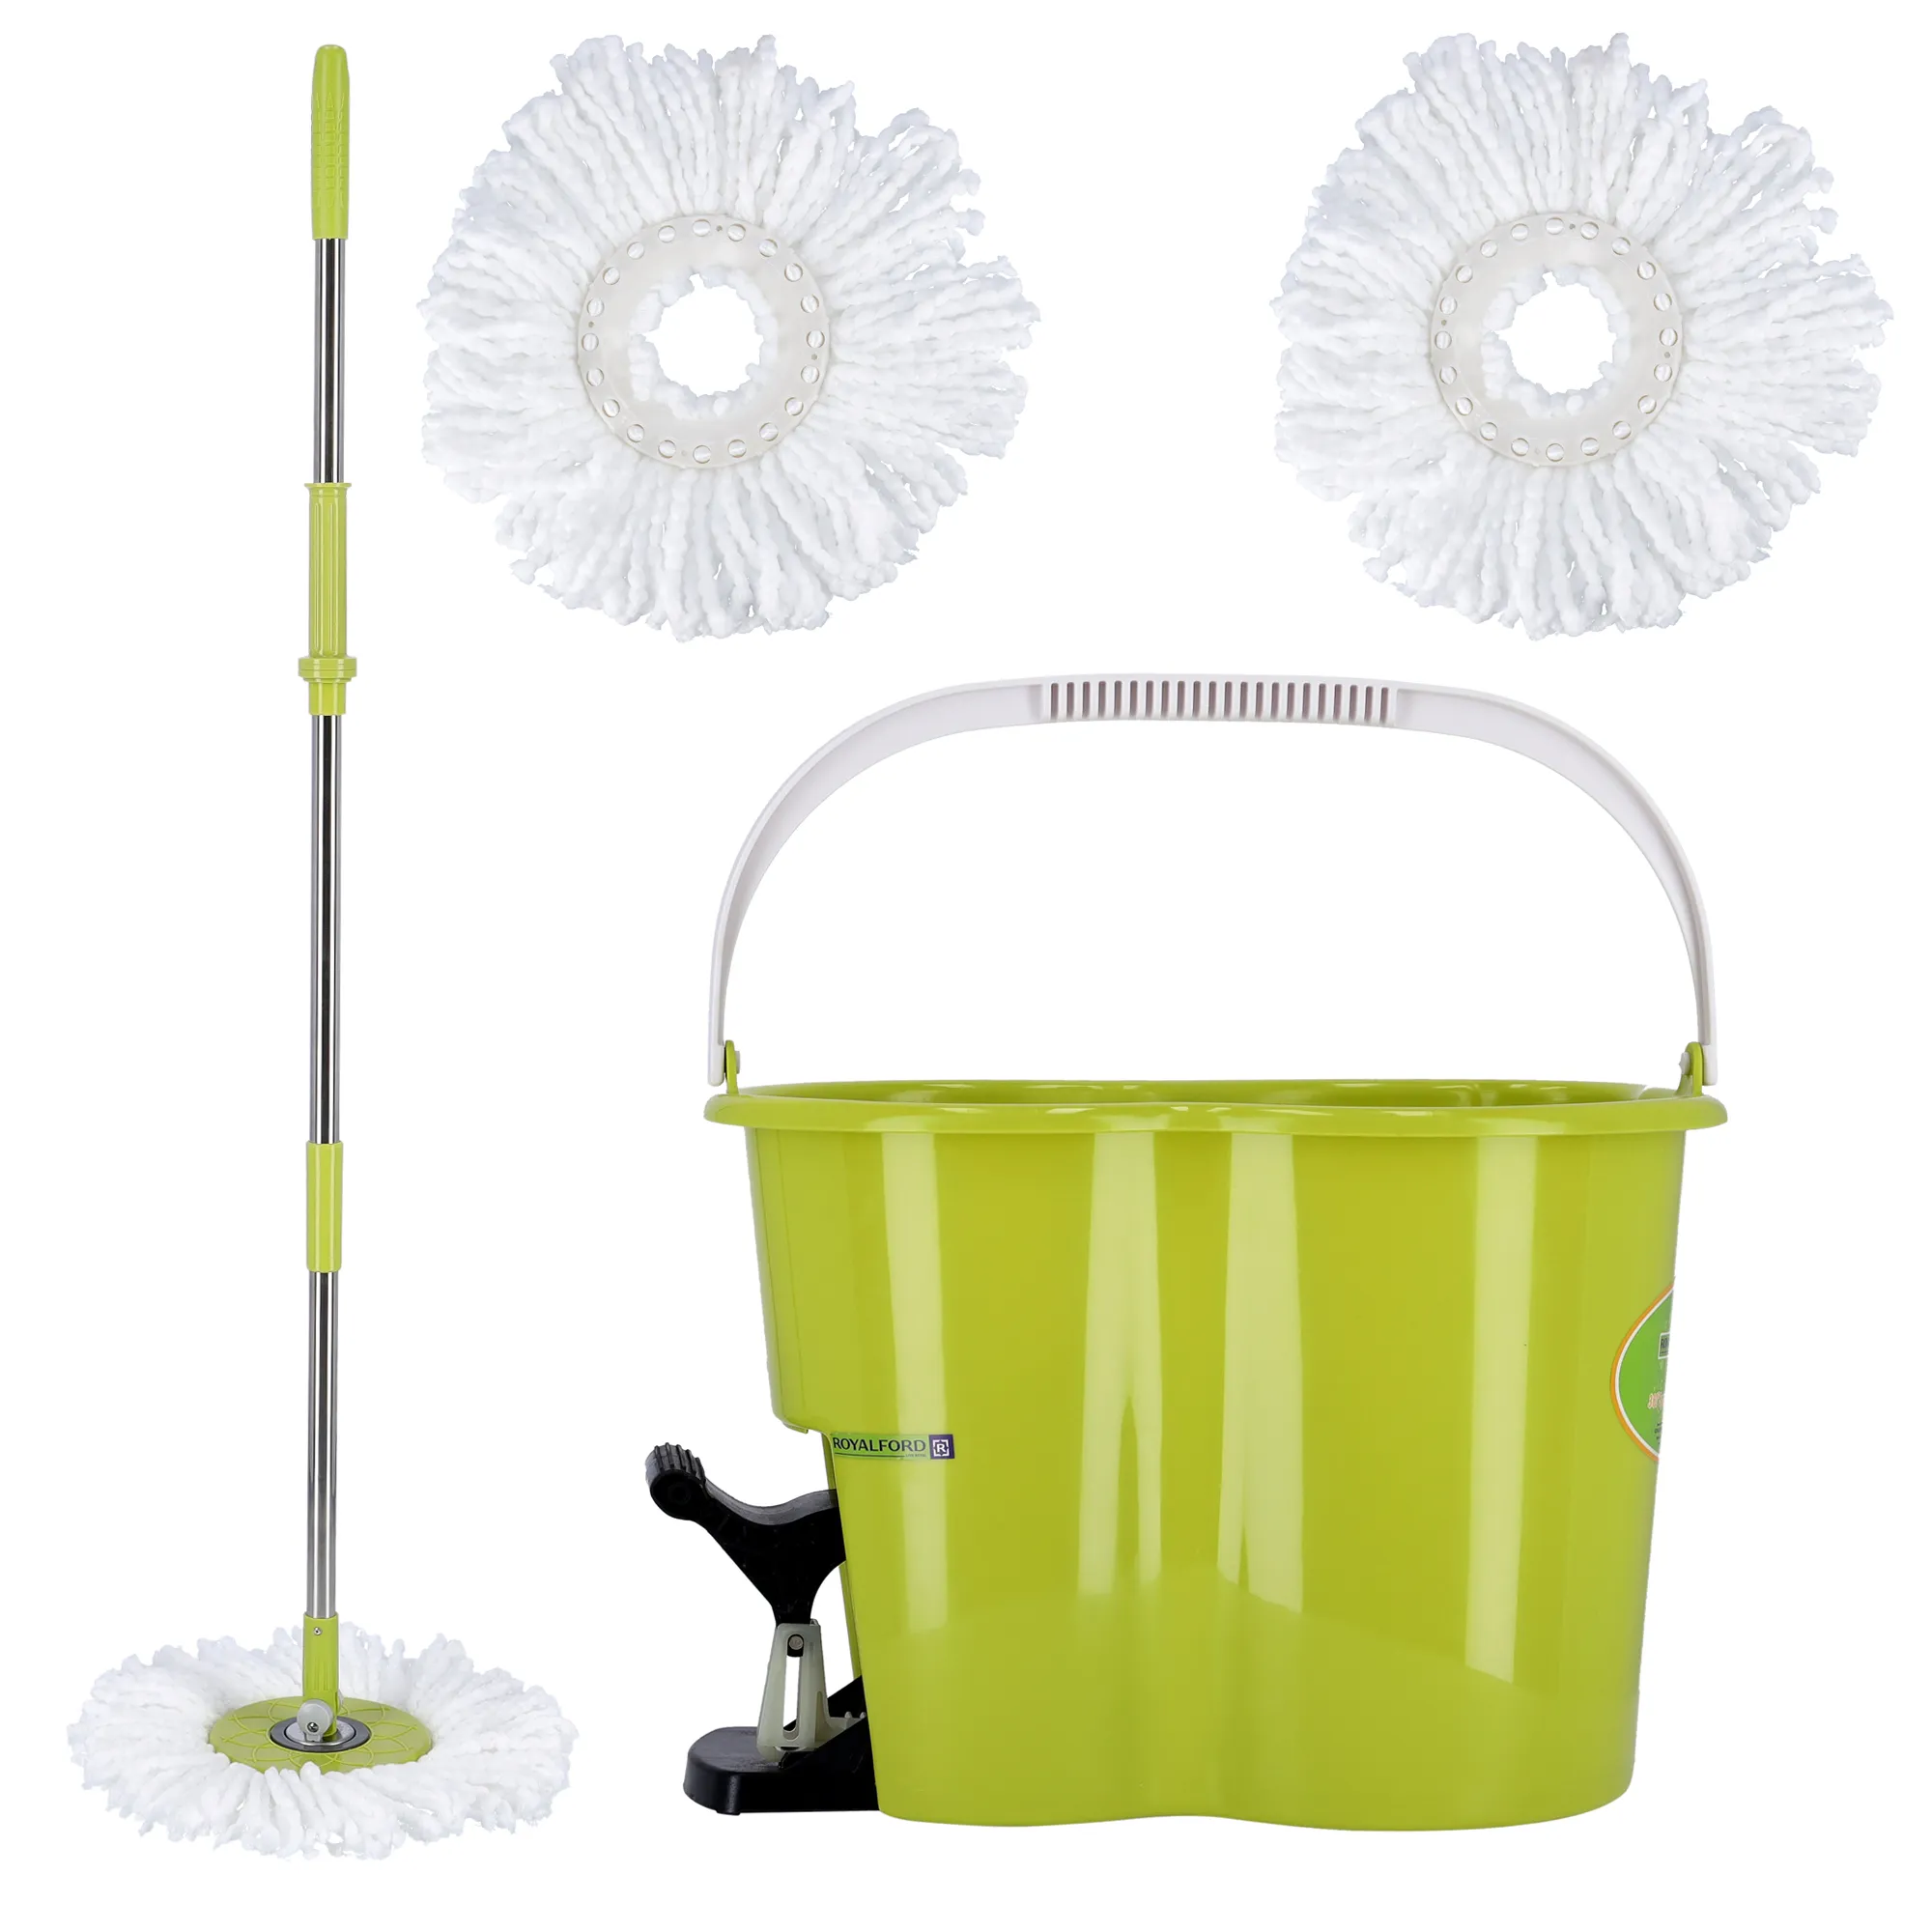 Royalford Spin Easy Mop with Bucket, Adjustable Handle, RF4238GR 360 Degree Spinning Mop Press Pedal & Dispenser Separates Clean and Dirty Water Ideal for Marble, Tile, Wooden Floors & More